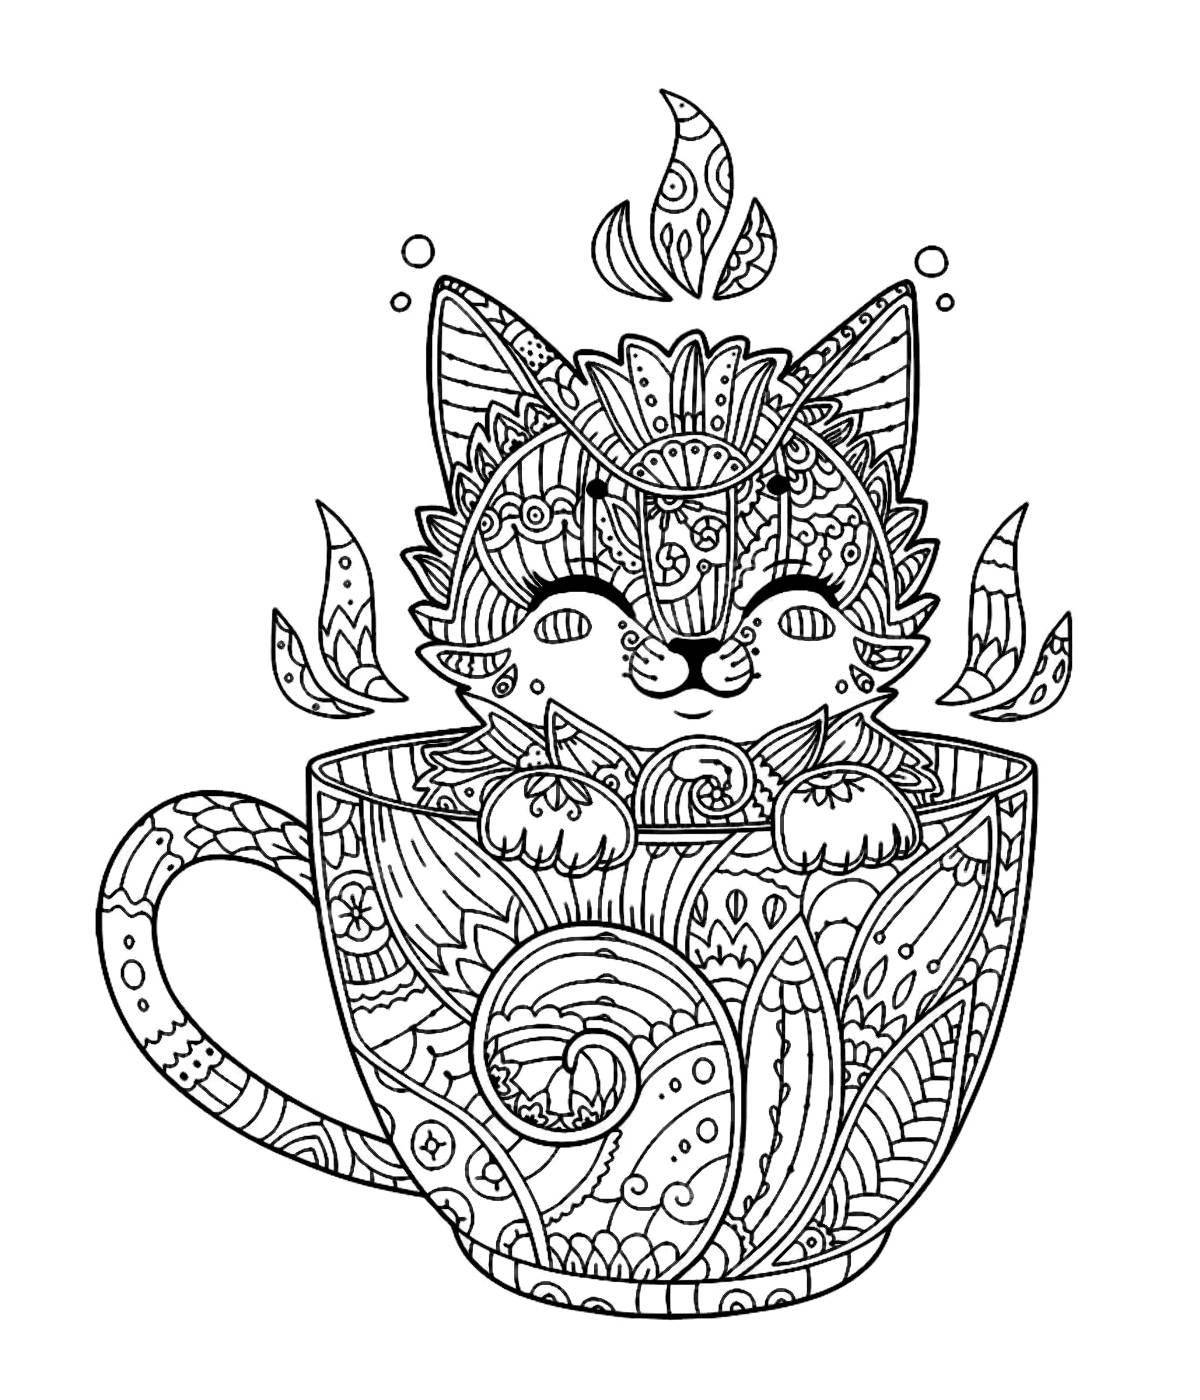 Coloring page happy kitten in a mug